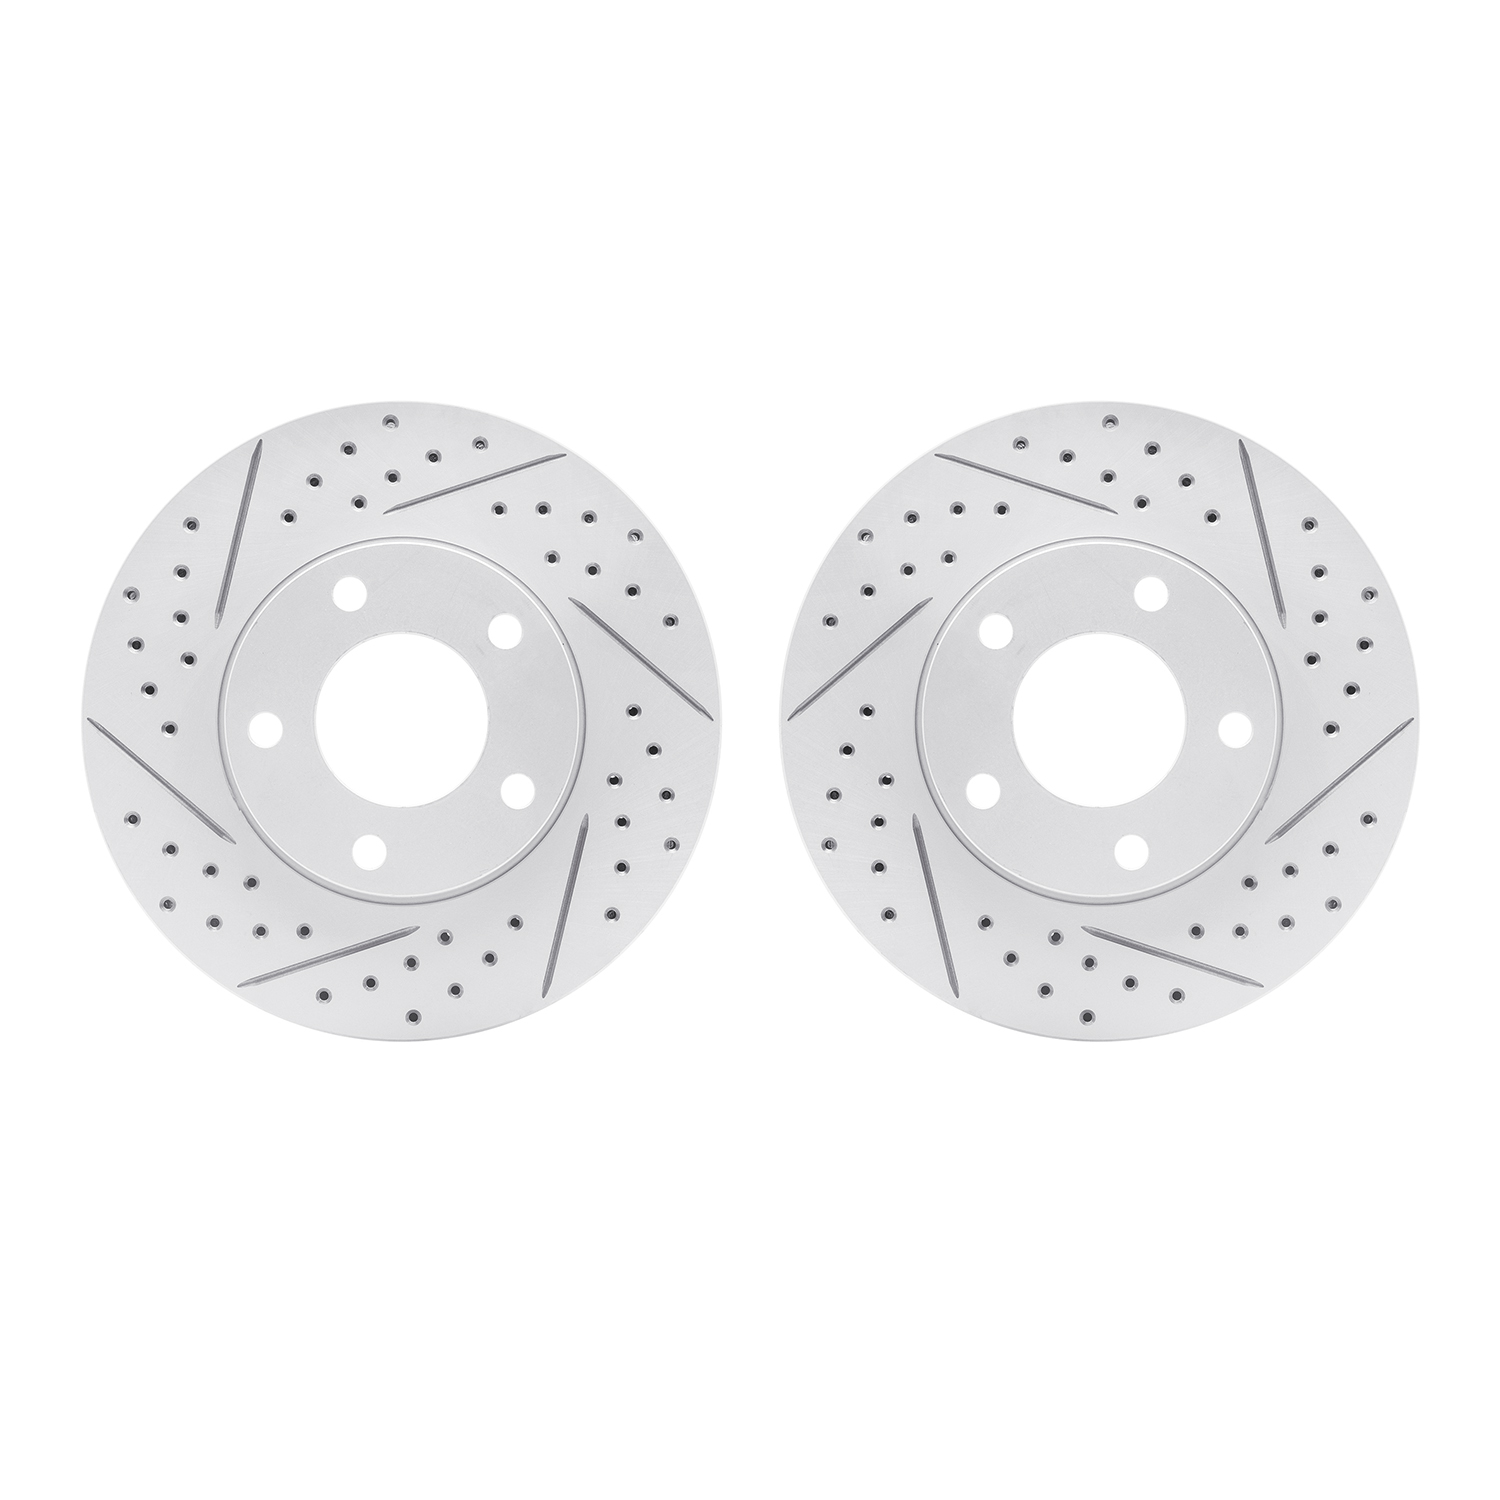 2002-80004 Geoperformance Drilled/Slotted Brake Rotors, 2004-2013 Ford/Lincoln/Mercury/Mazda, Position: Front